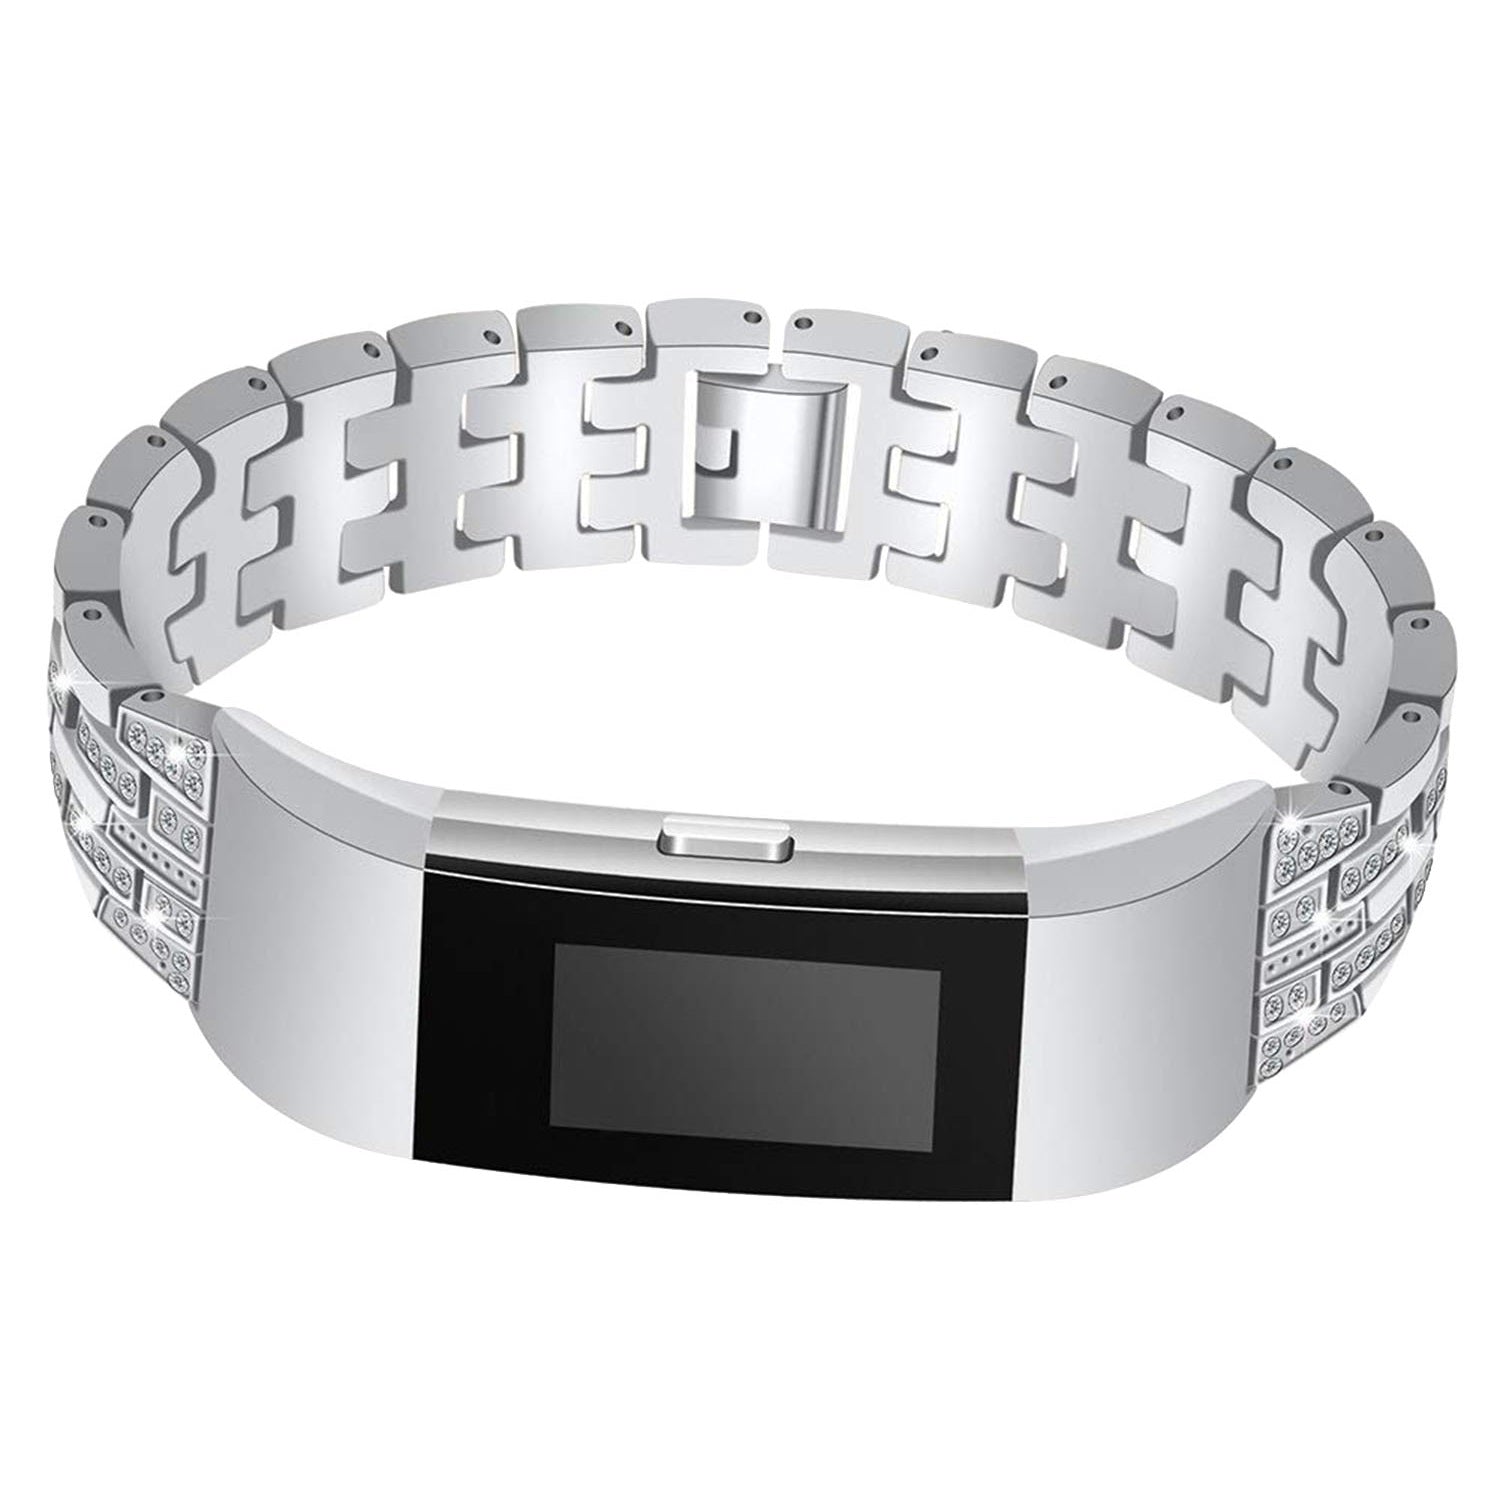 For Fitbit Charge 6 5 Bling Stainless Steel Band Bracelet